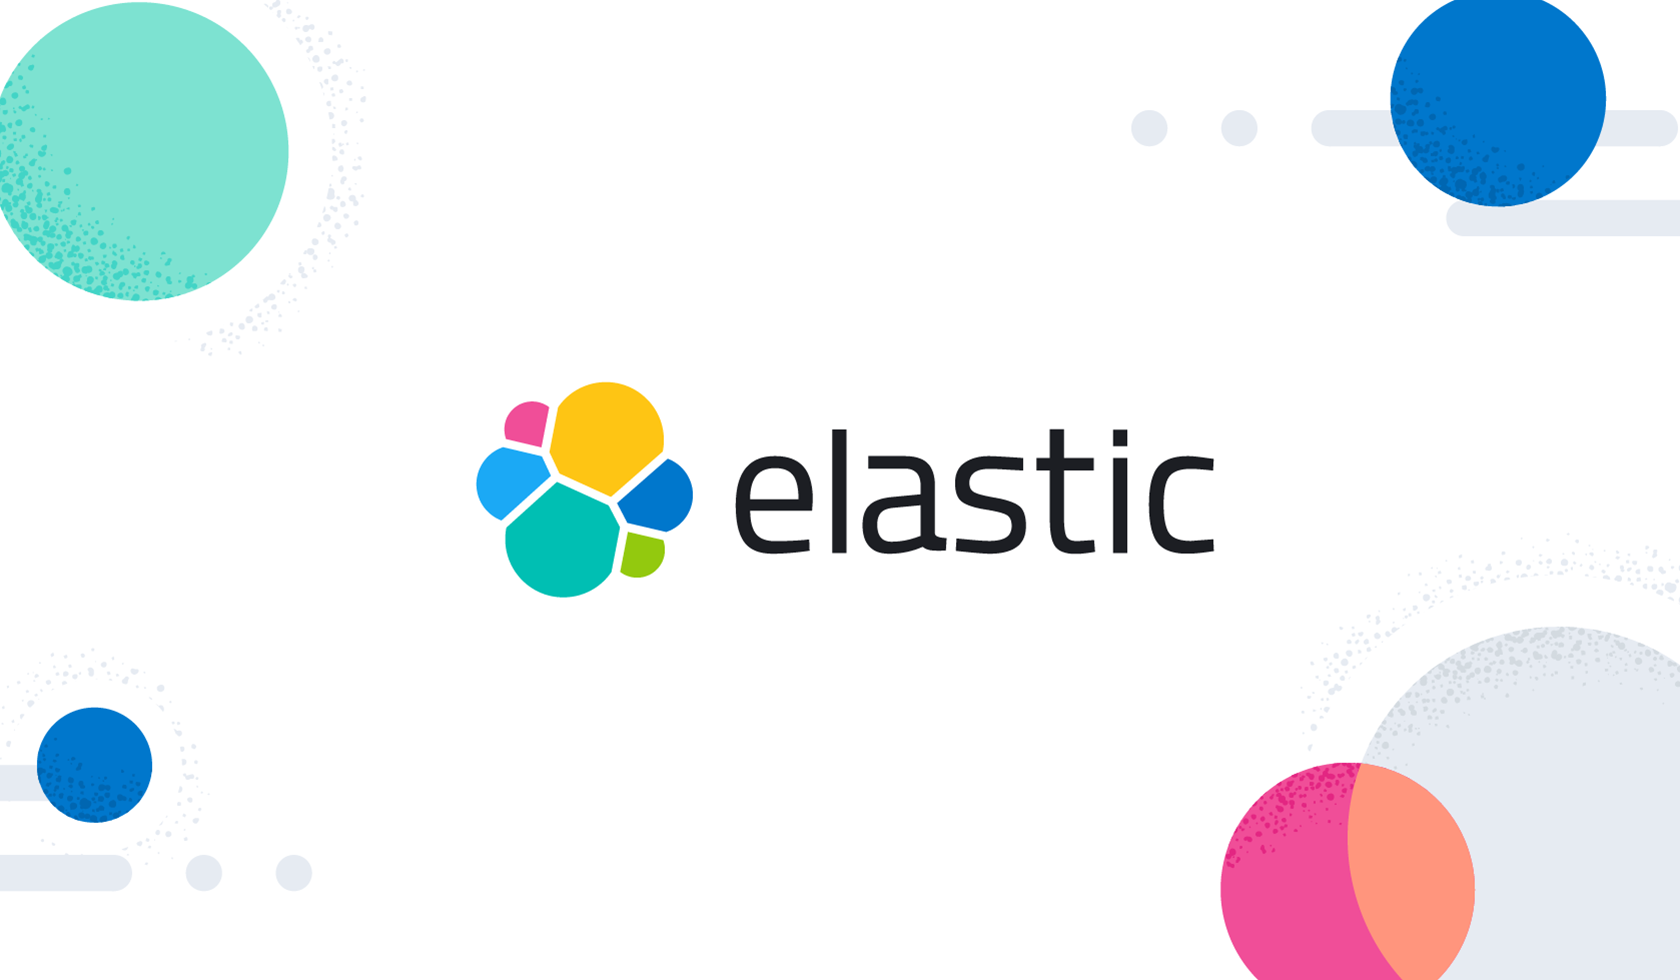 Elastic wins Google Cloud's Global Technology Partner of the Year